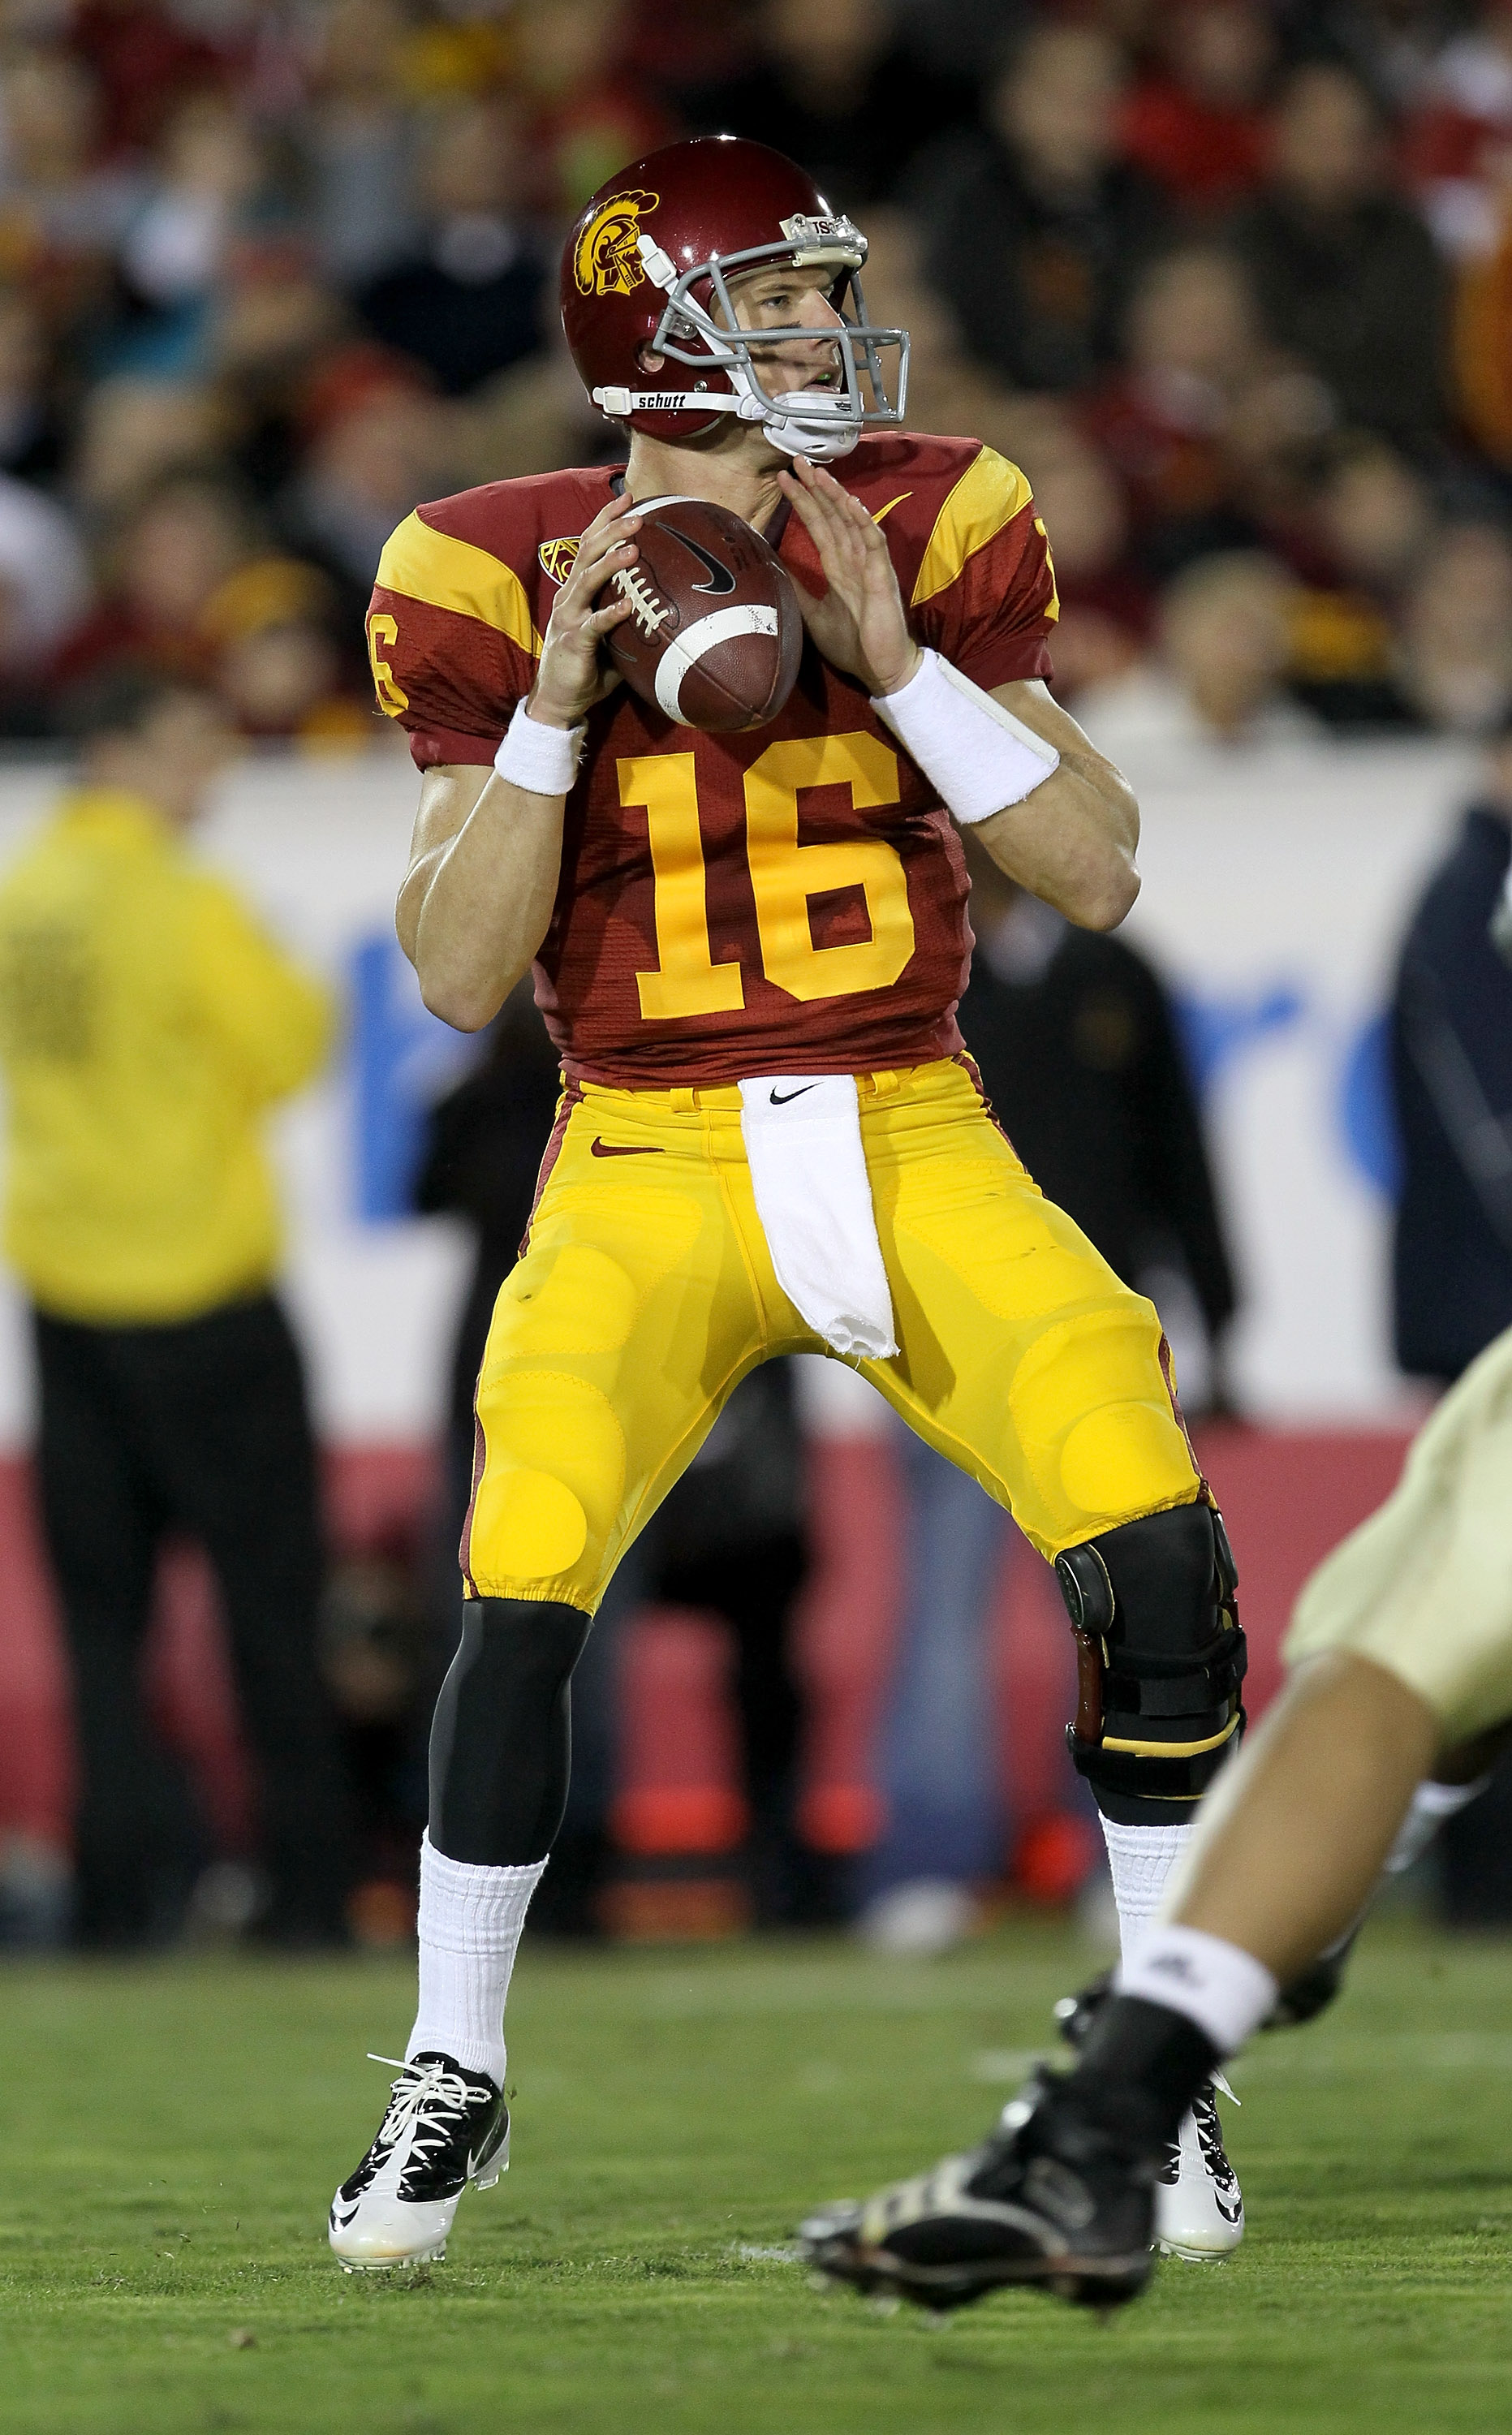 LOS ANGELES, CA - NOVEMBER 27:  Quarterback Mitch Mustain #16 of the USC Trojans drops back to throw a pass against the Notre Dame Fighting Irish at the Los Angeles Memorial Coliseum on November 27, 2010 in Los Angeles, California.  (Photo by Stephen Dunn